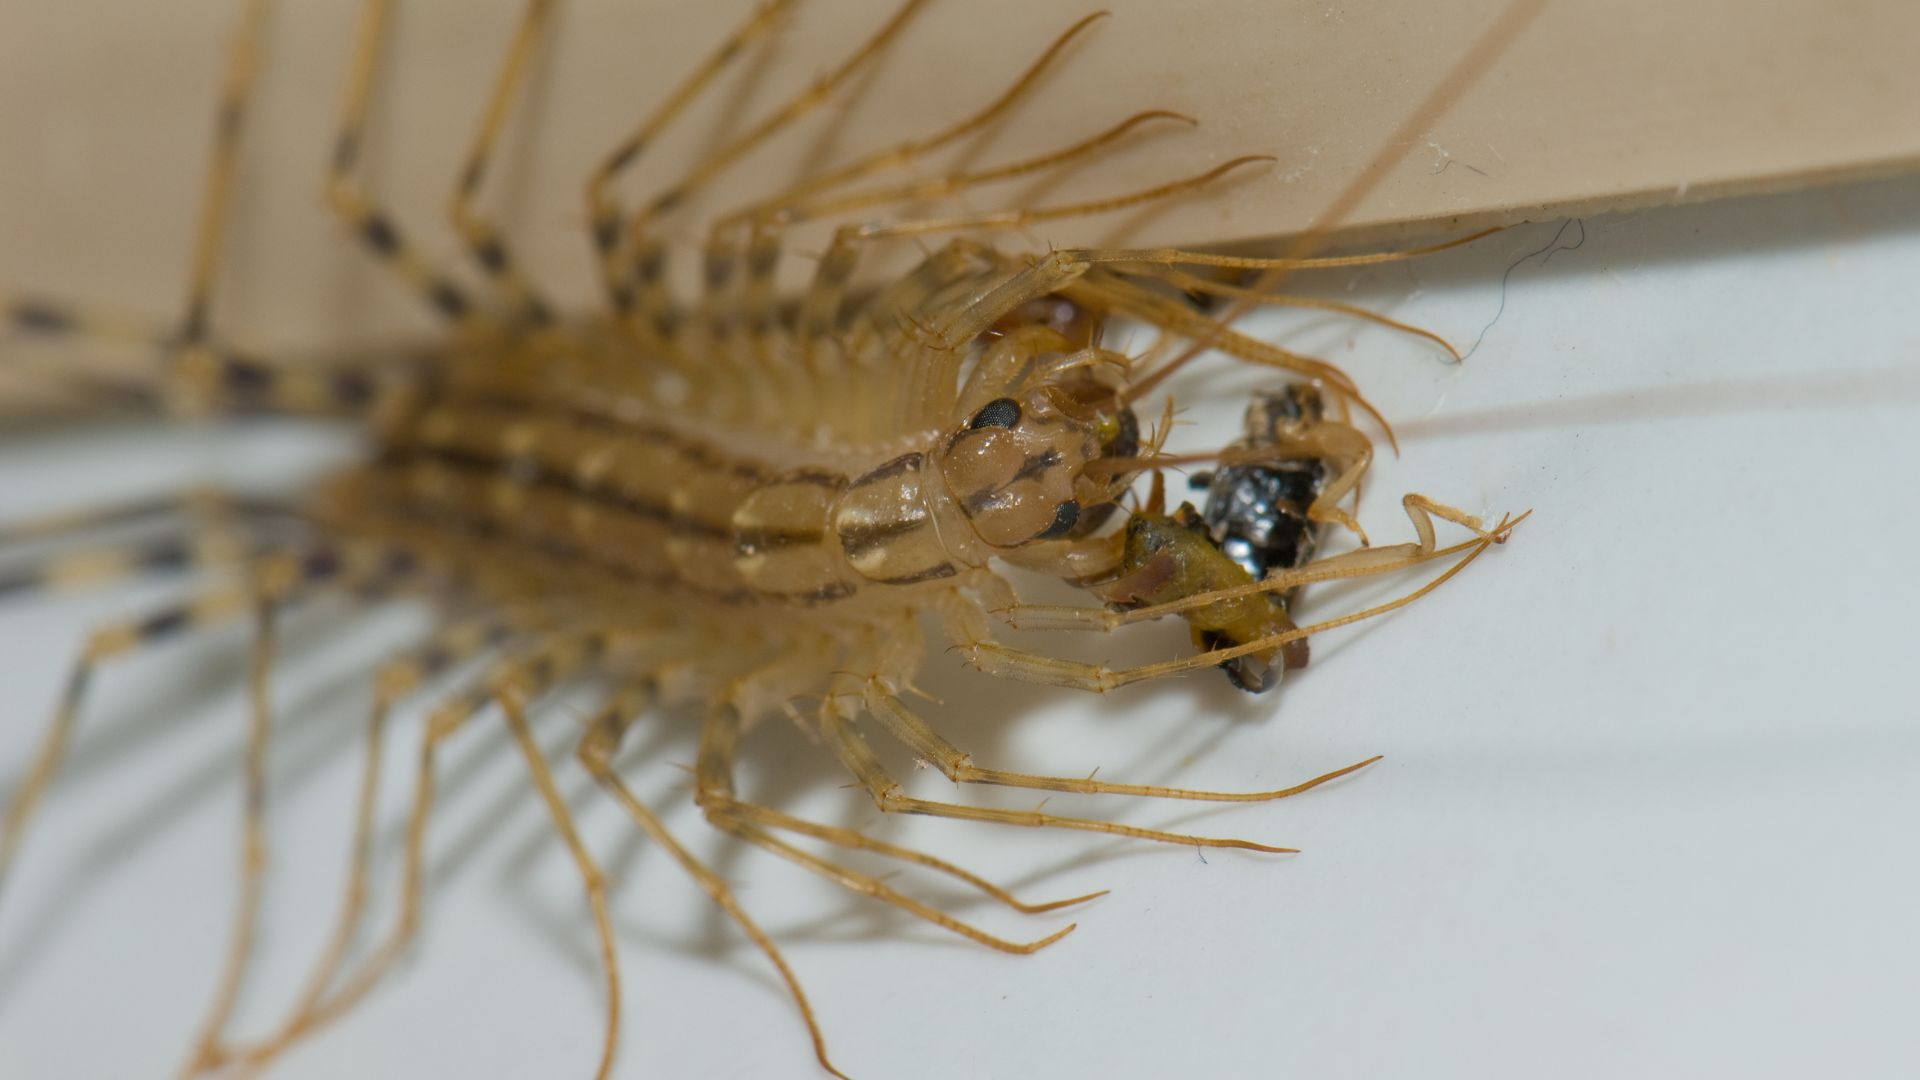 An image of a centipede feeding on an insect.